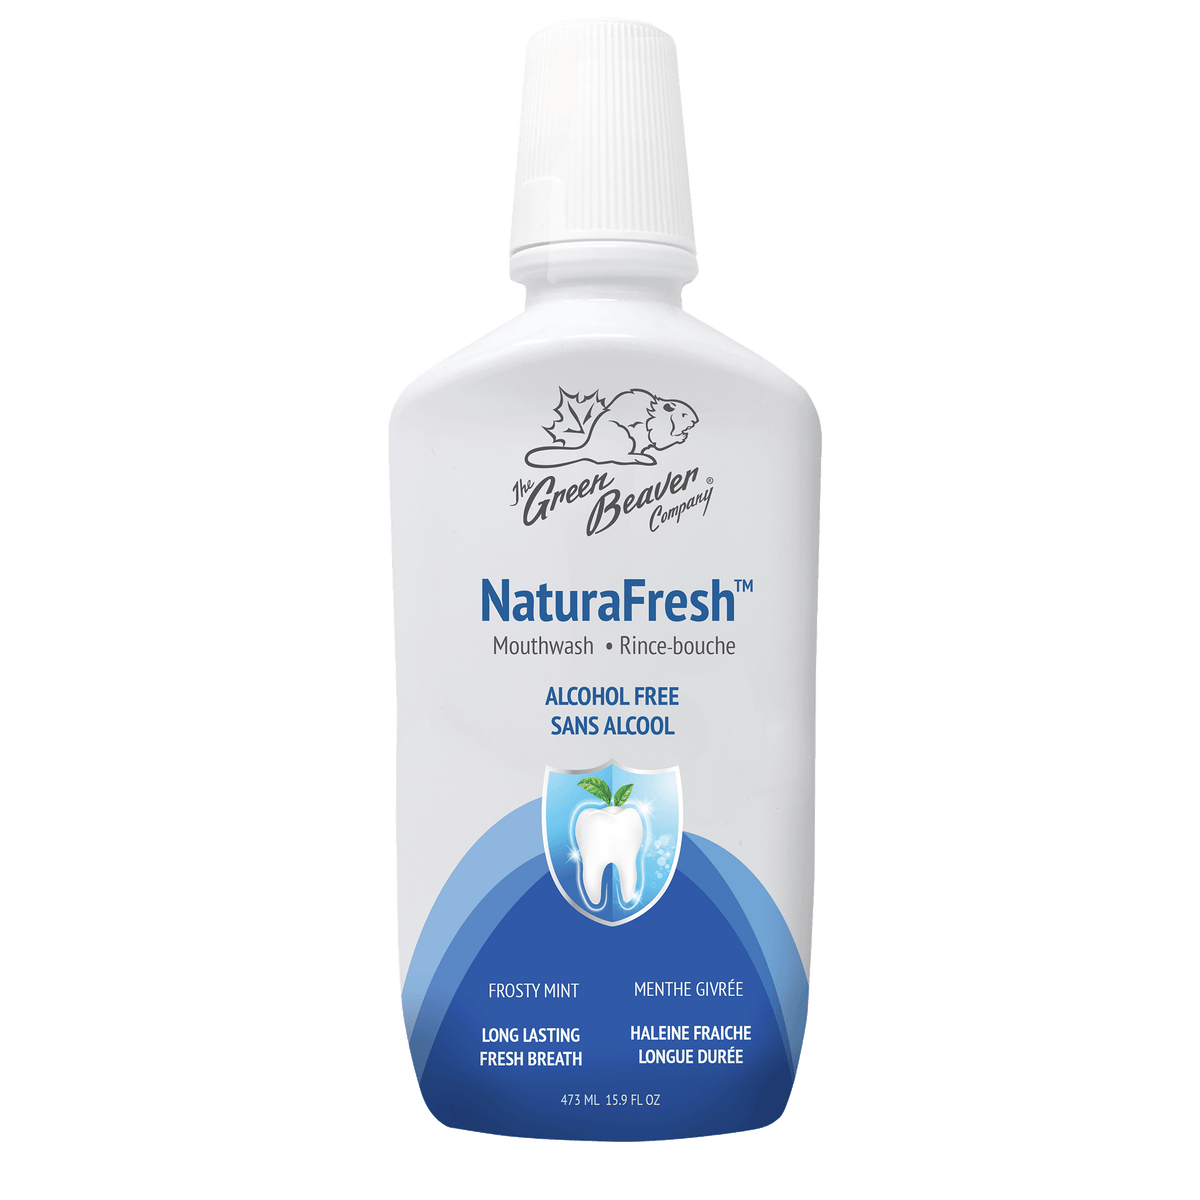 Naturafresh™ Alcohol Free Mouthwash – Frosty Mint - by Green Beaver |ProCare Outlet|